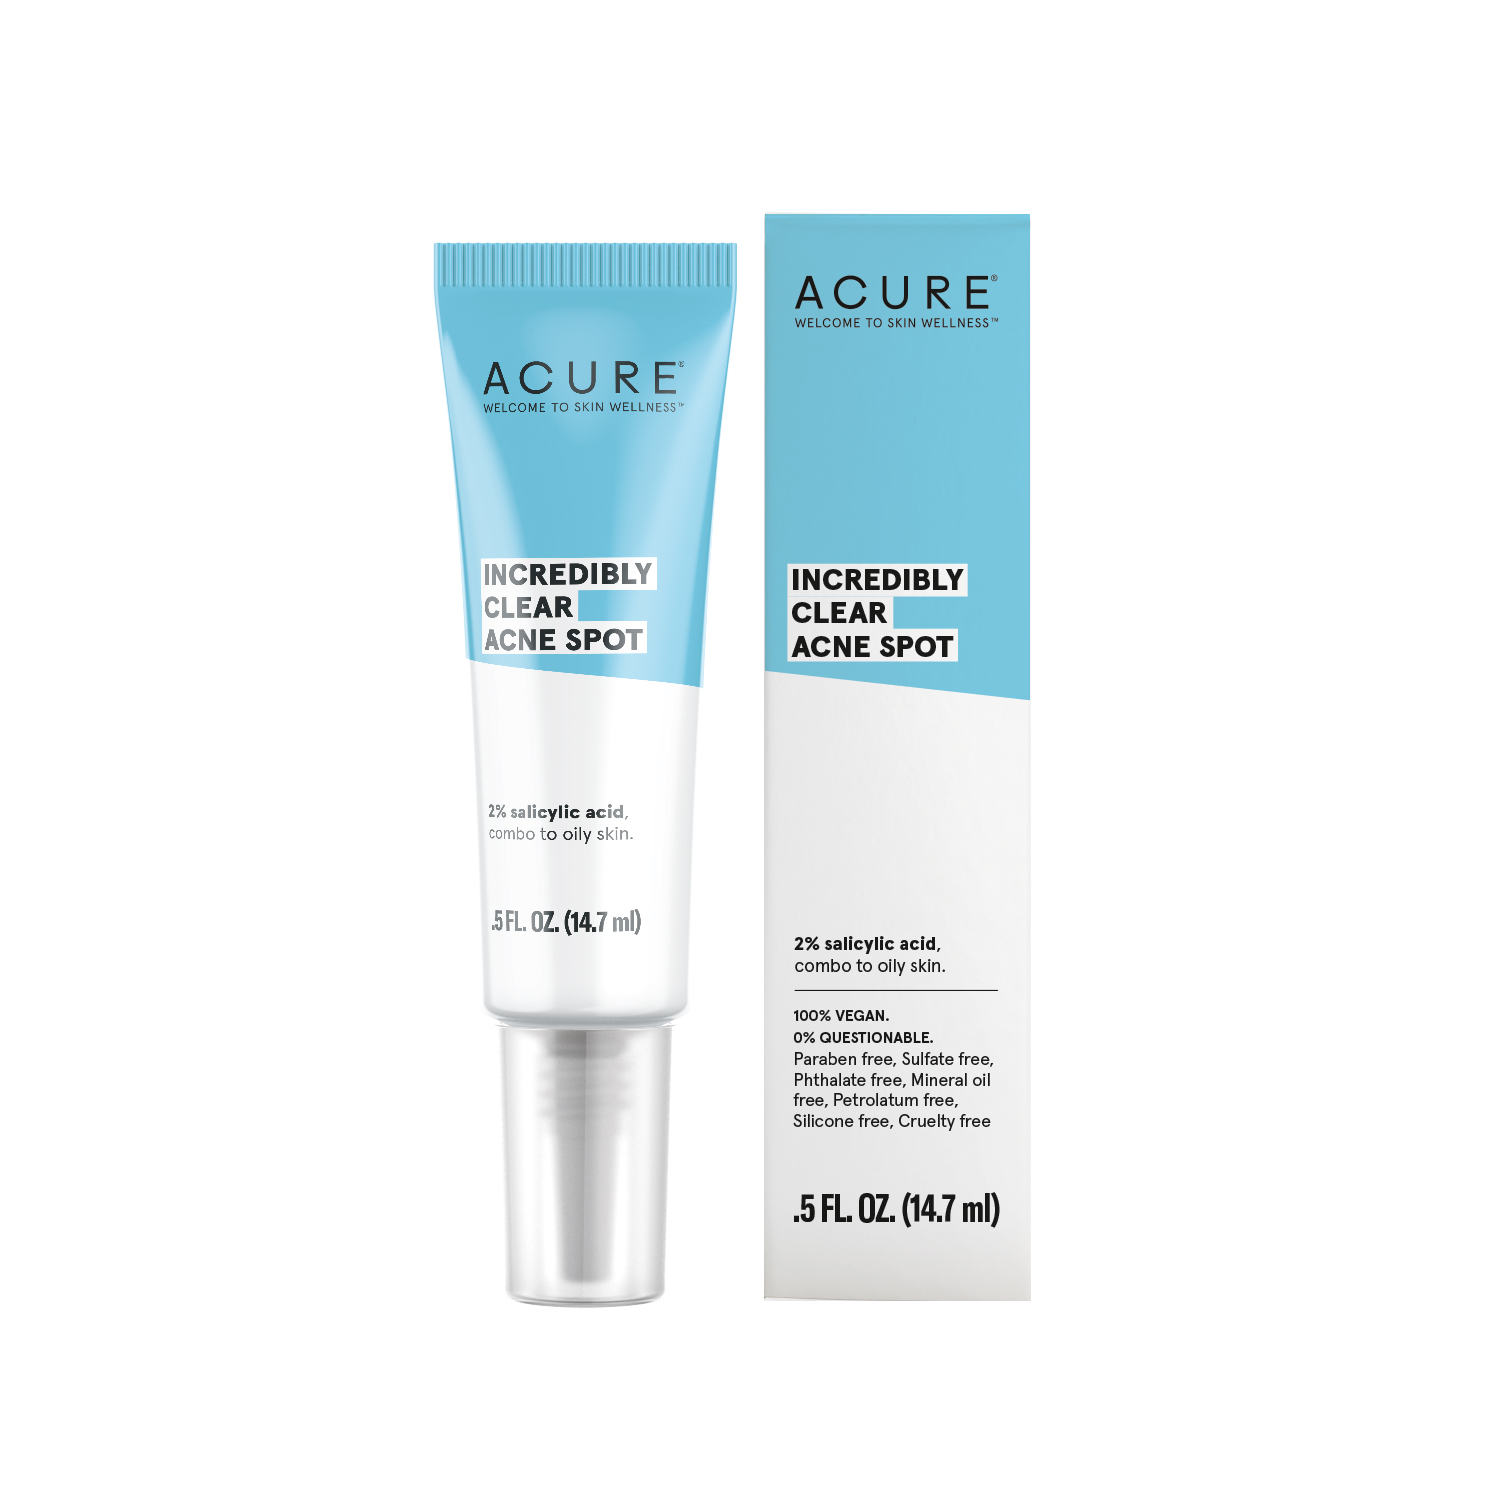 Acure Acne Spot